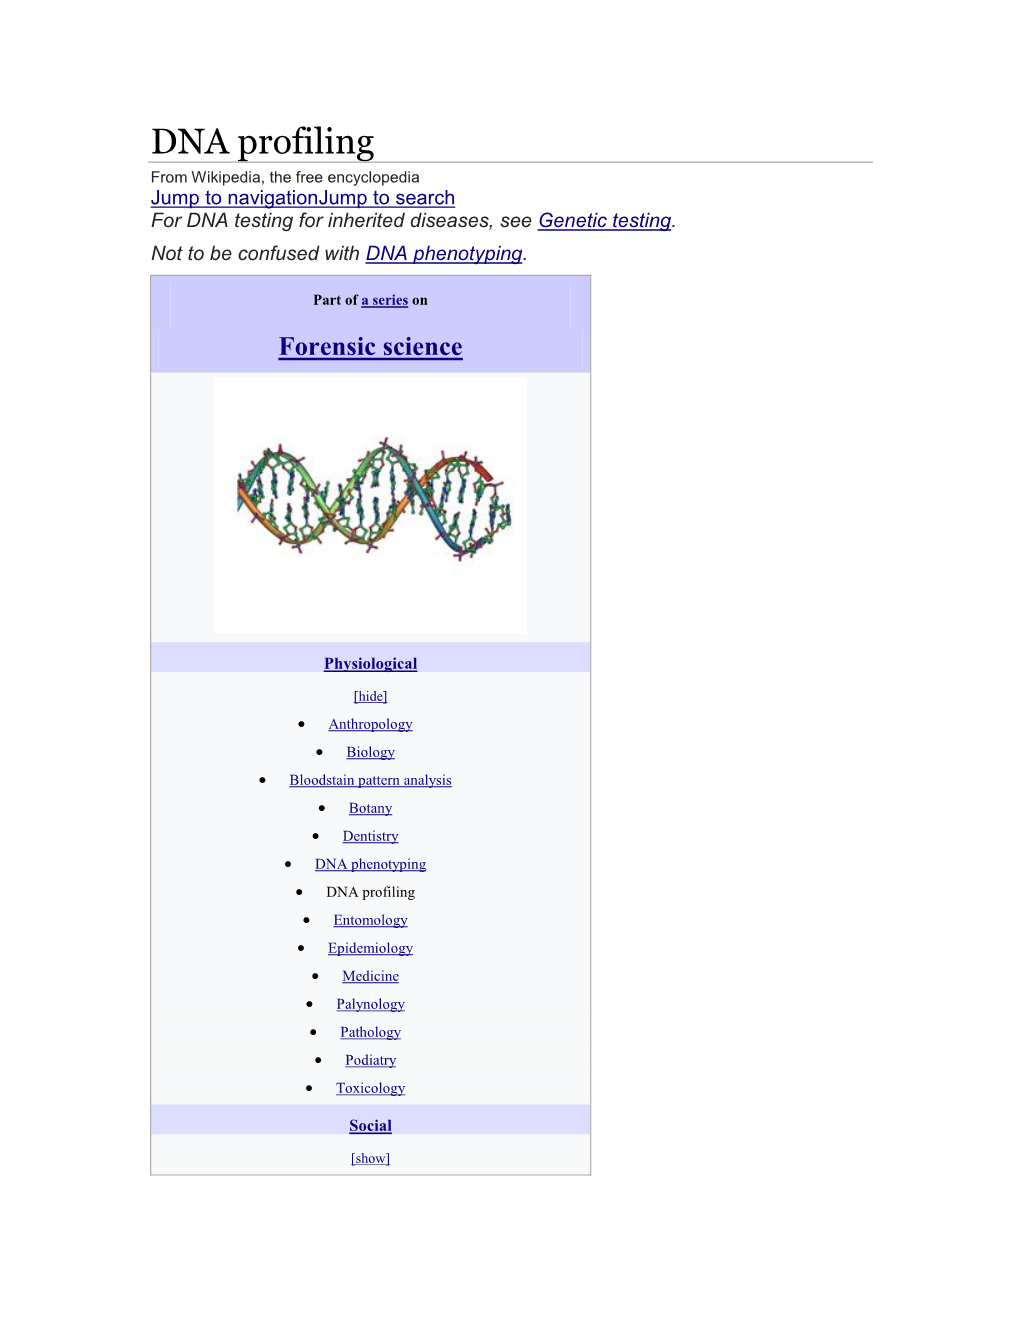 DNA Profiling from Wikipedia, the Free Encyclopedia Jump to Navigationjump to Search for DNA Testing for Inherited Diseases, See Genetic Testing